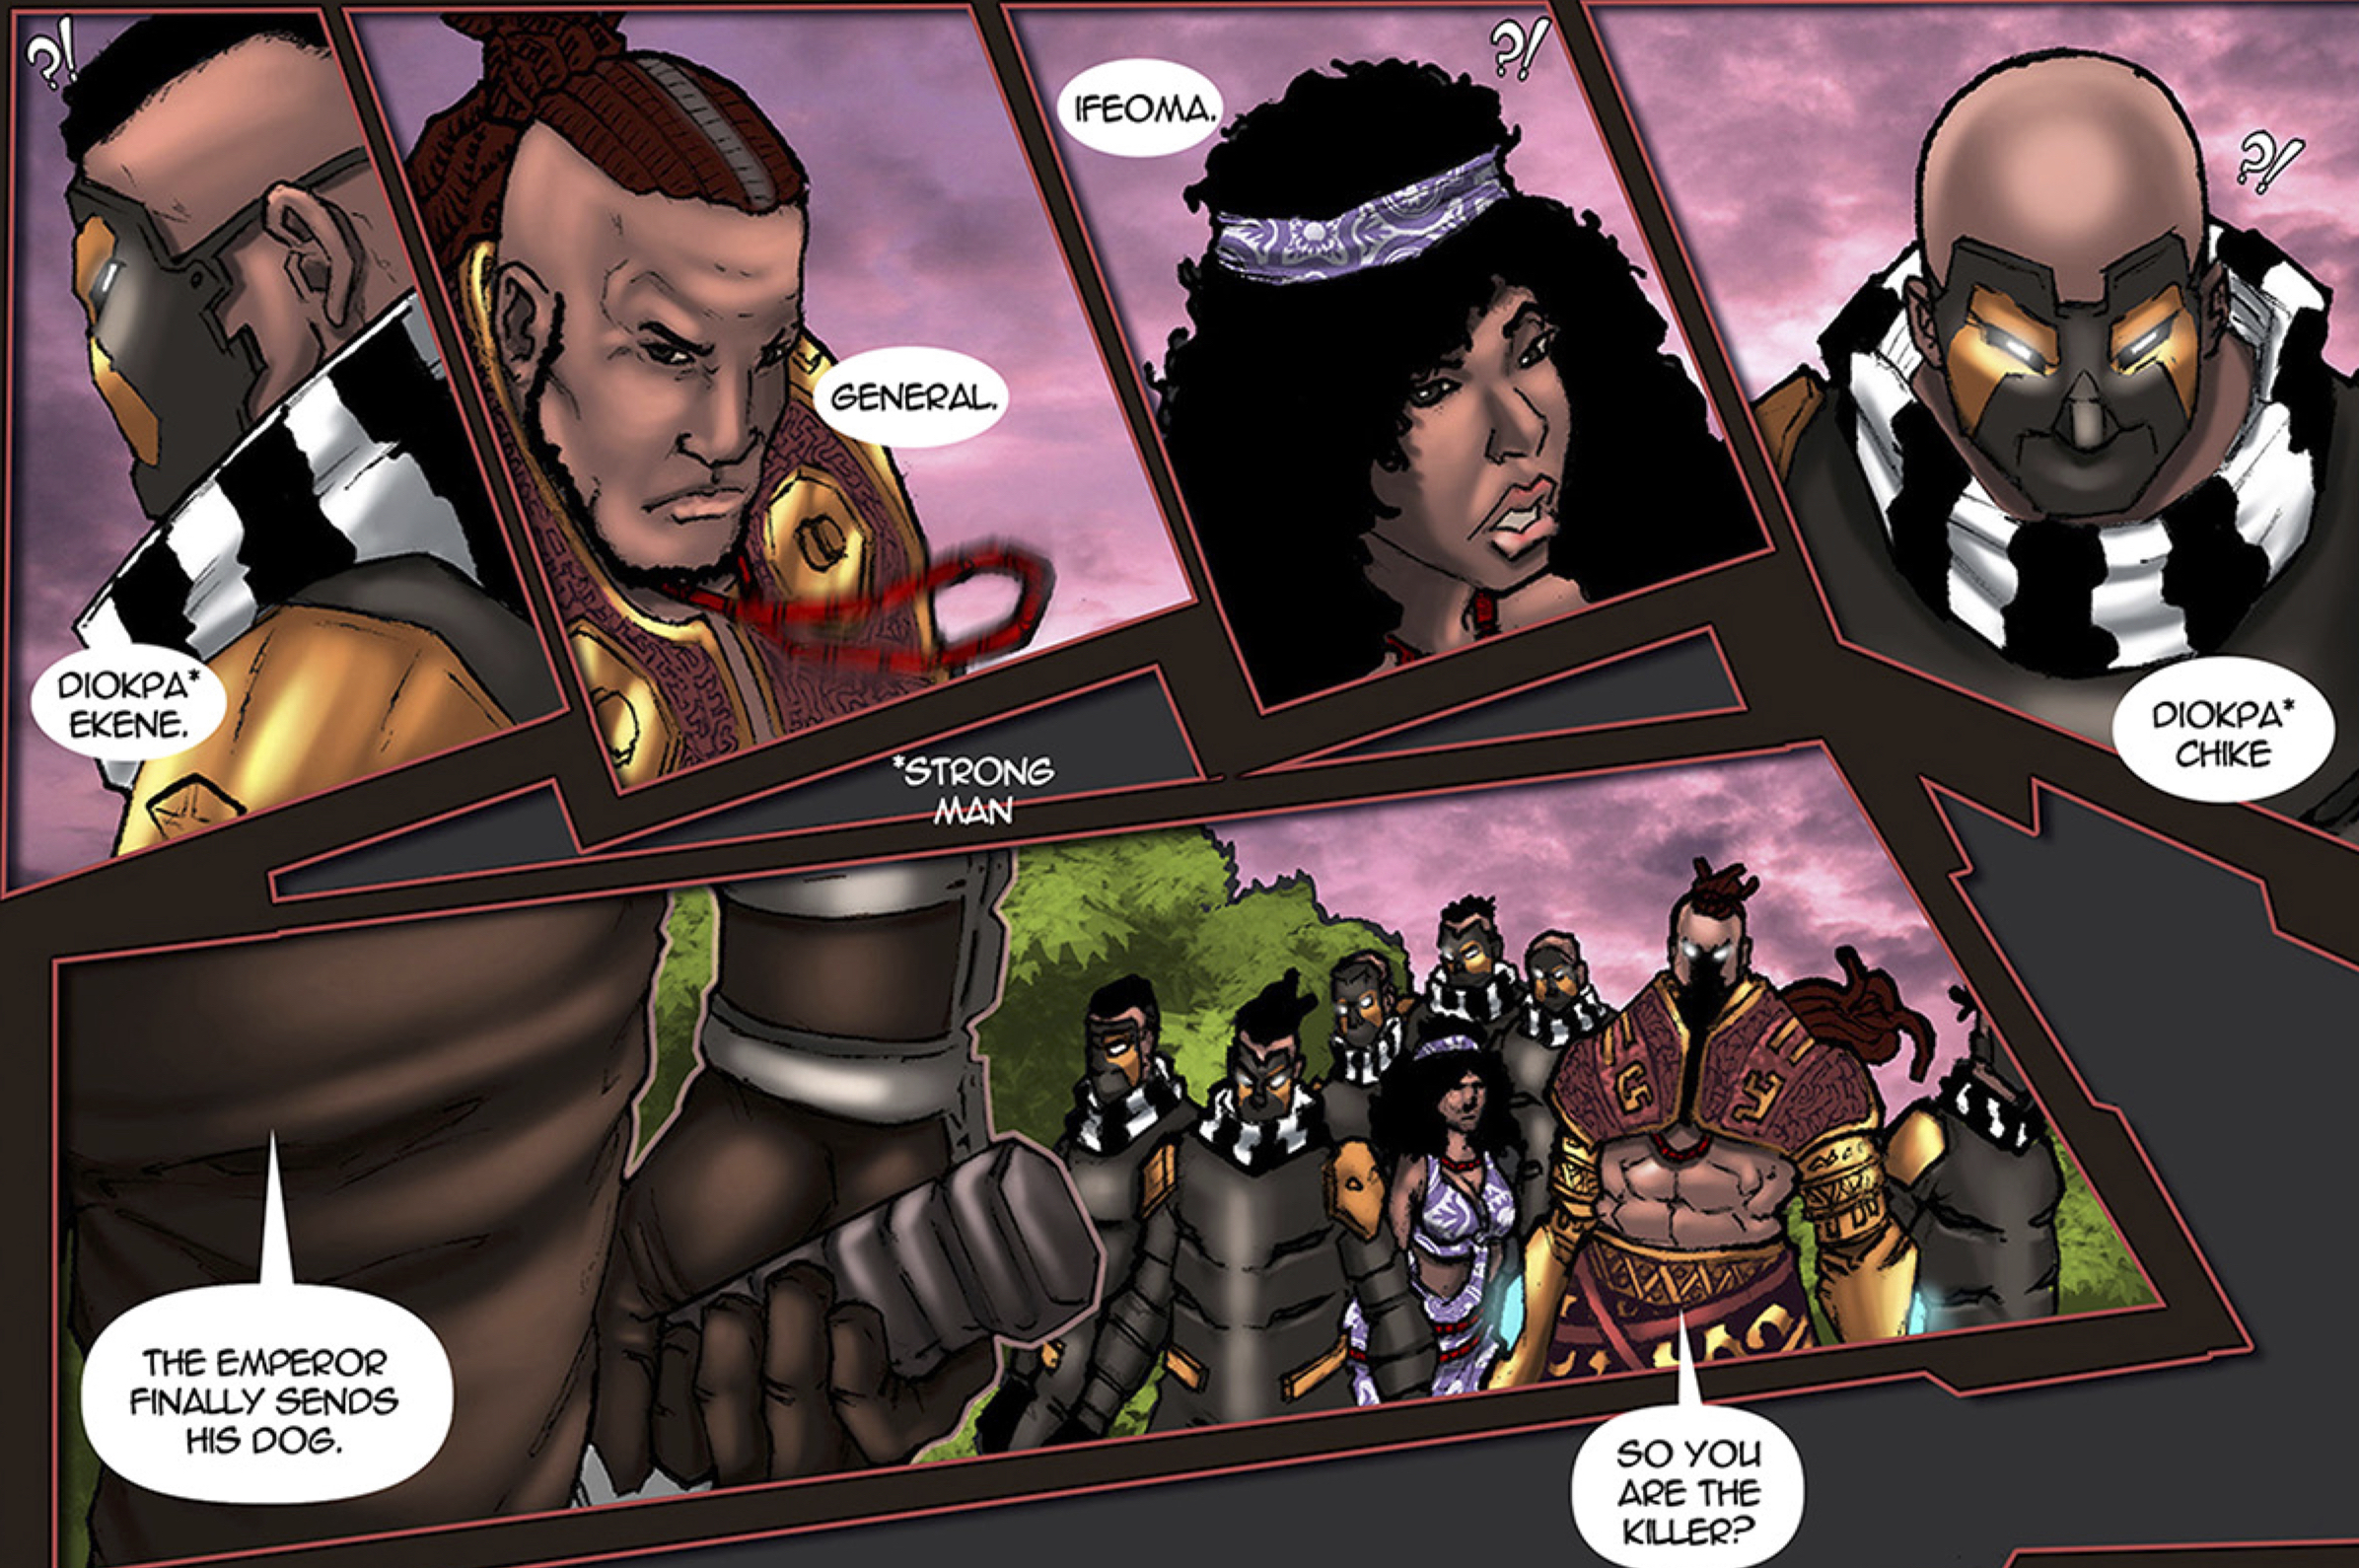 Ifeoma, Alaric and the Diokpas also known as strong men in the African comic, Scion: Immortal published by Comic Republic